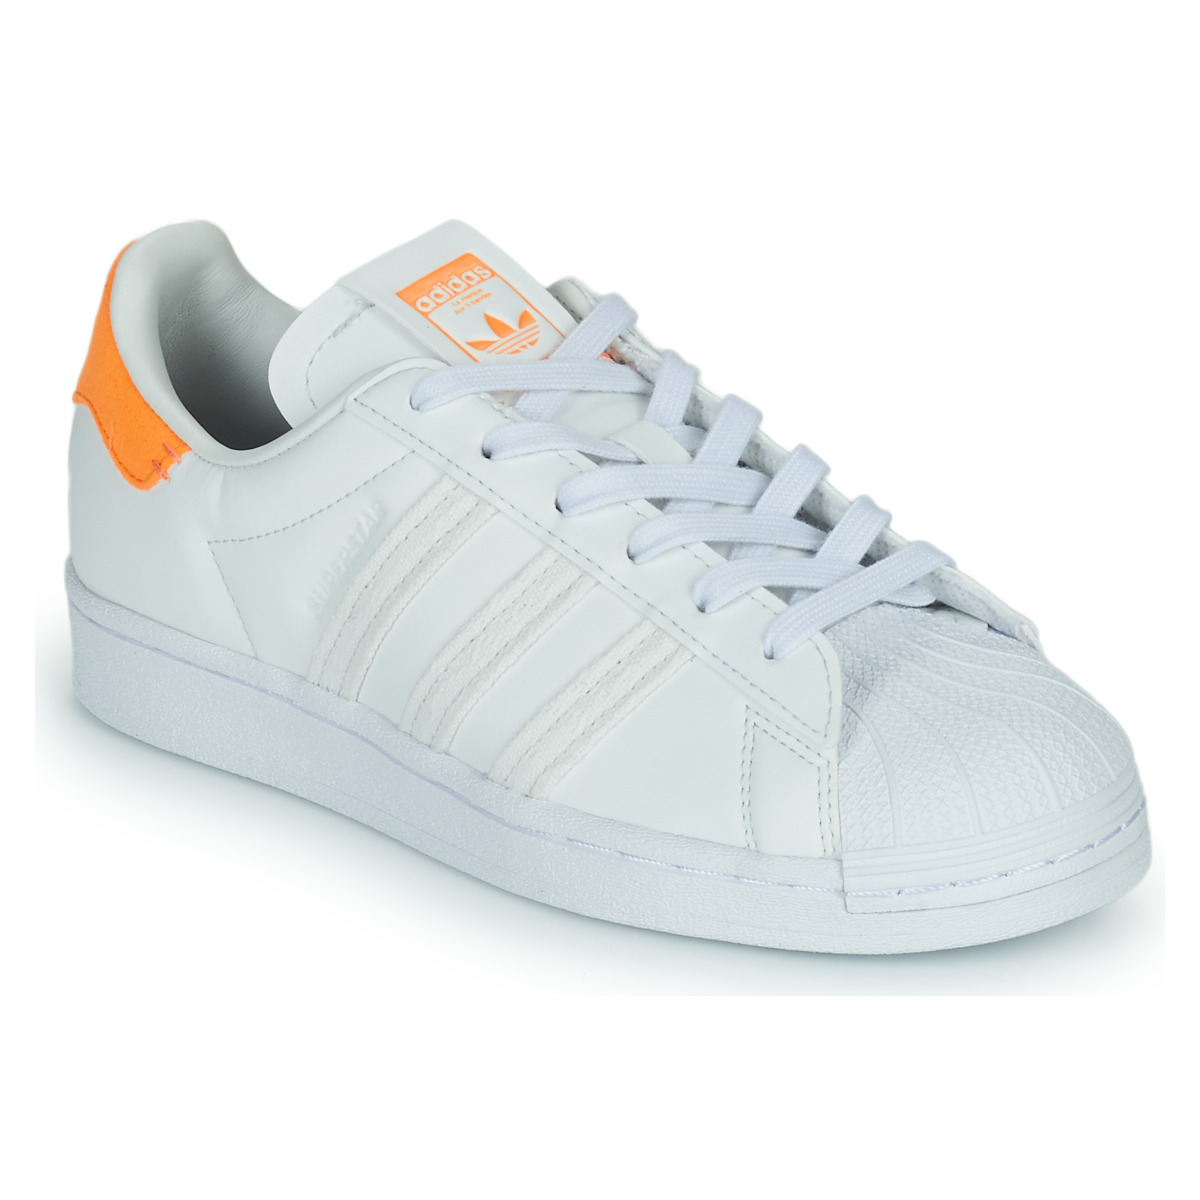 adidas Originals / NET | - White top Women W Shoes SUPERSTAR Orange trainers Low delivery ! - Spartoo Free